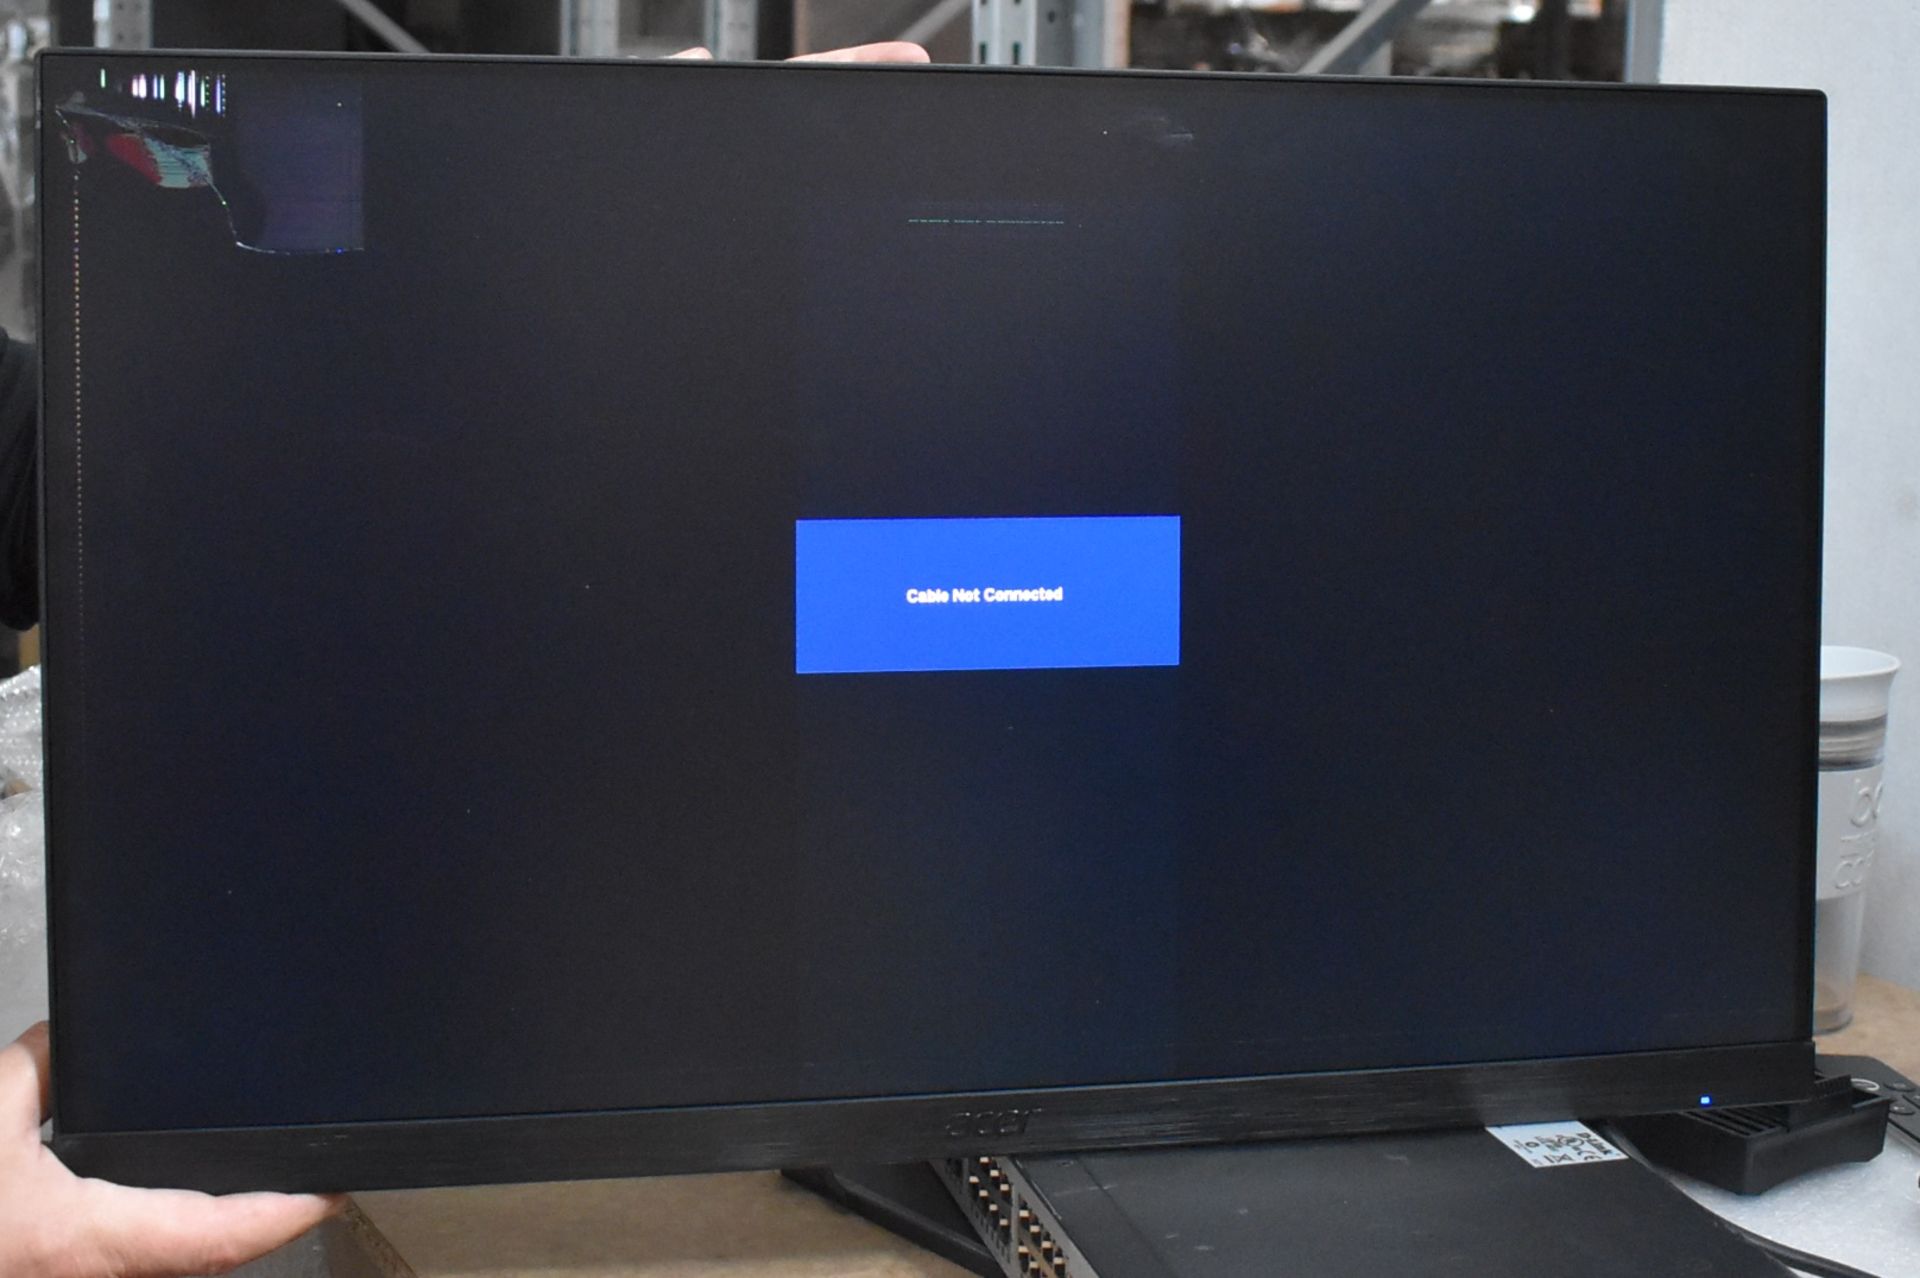 15 x Acer 27 Inch FHD Monitors - Model ET271 - Spares or Repairs With Damaged Screens - Ref: - Image 21 of 22